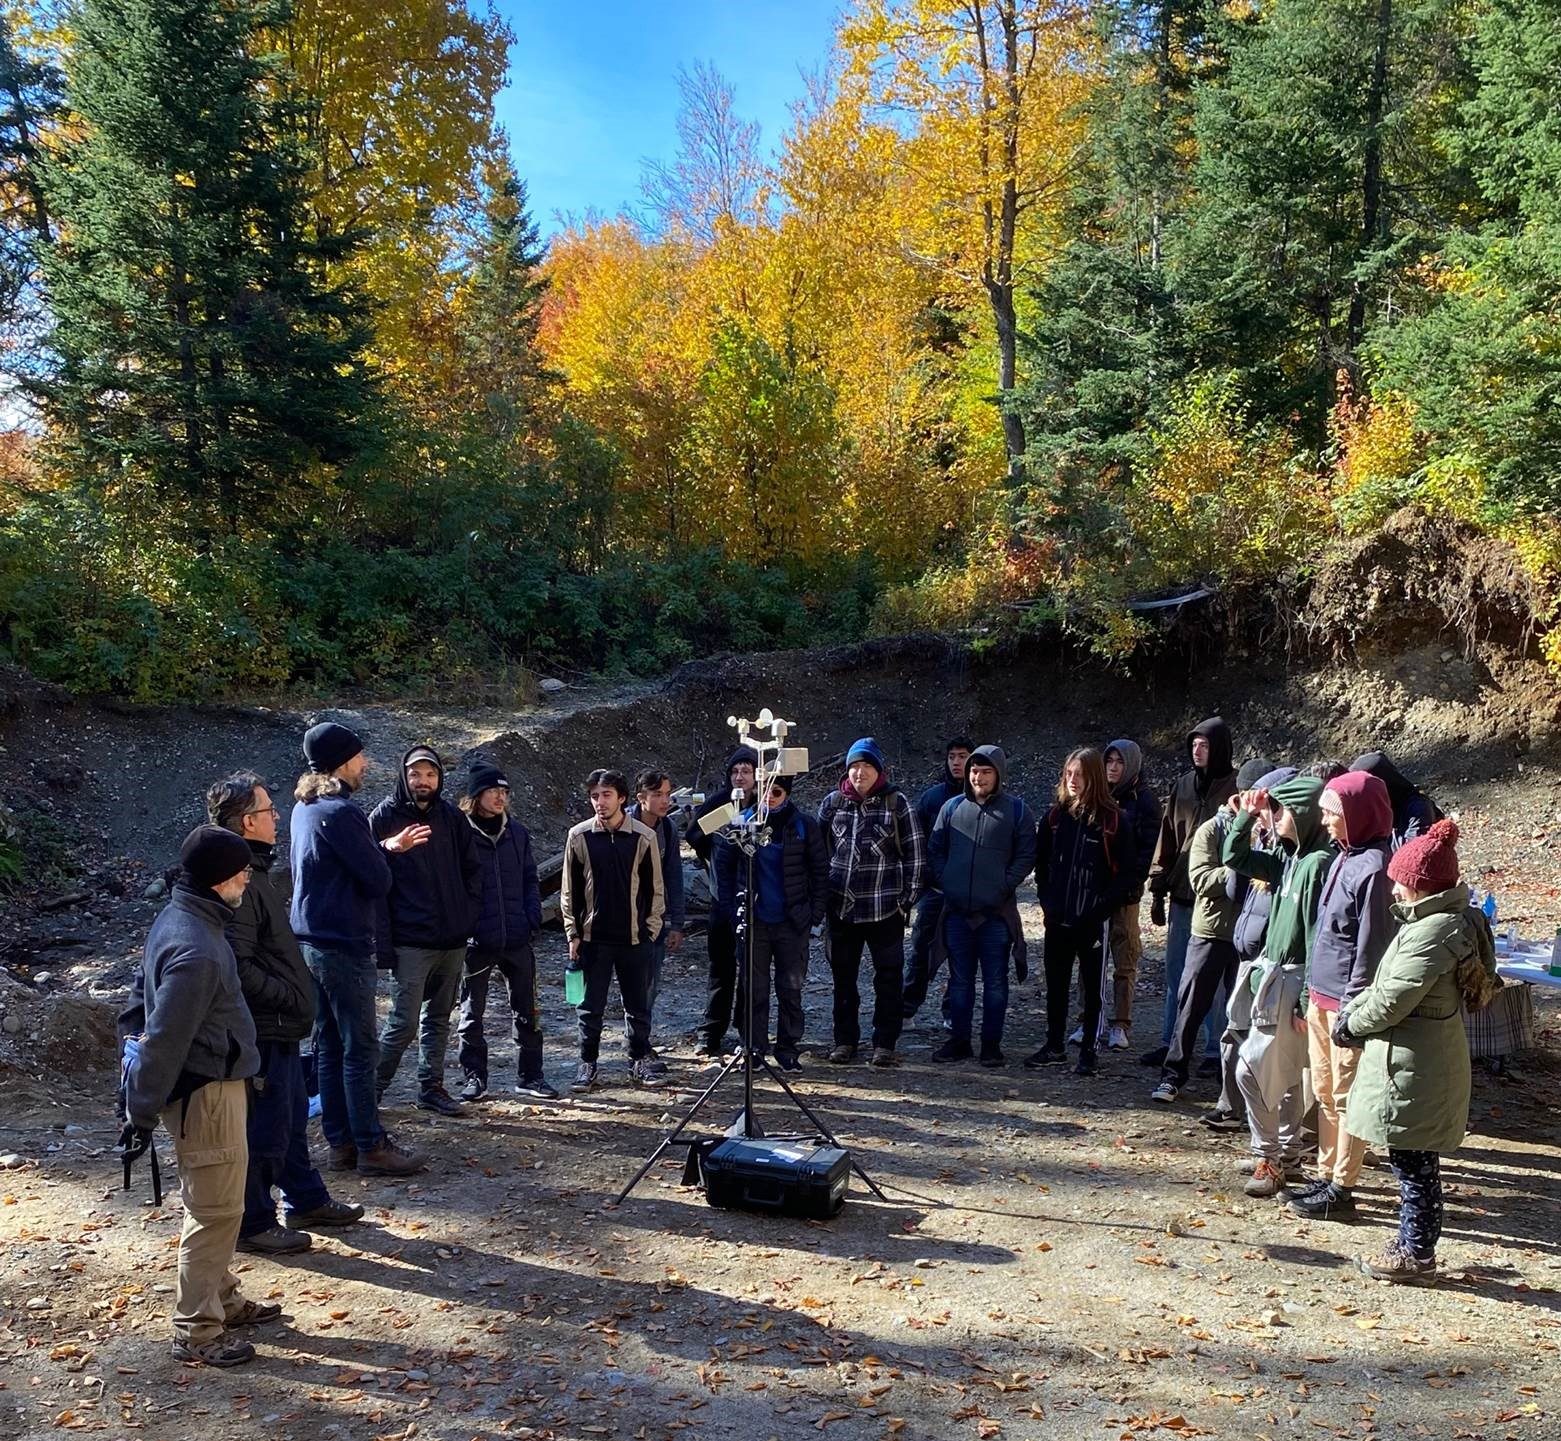  About 20 people are standing in a semicircle around a portable weather station on a tripod in the center of a sandy clearing surrounded by fall-coloured hardwoods. The people are listening to a man, whom we guess is a teacher explaining something to them.